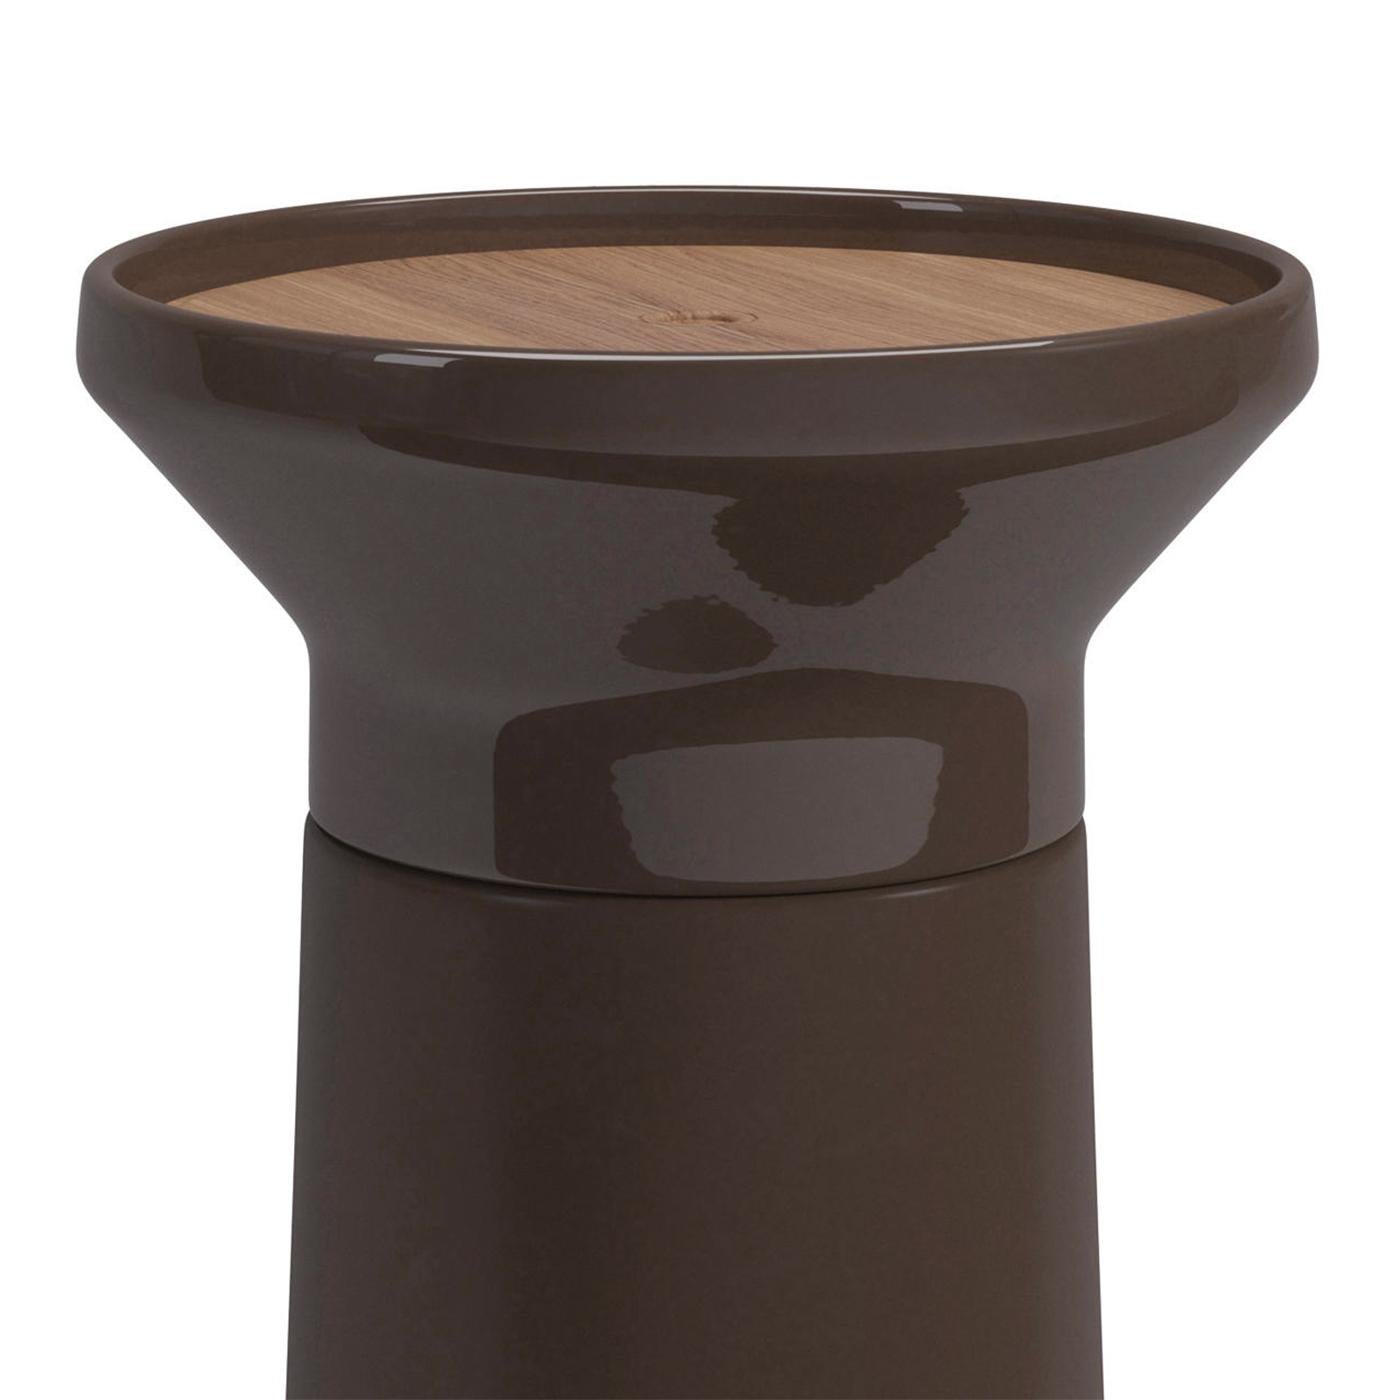 Side table lonum choco with base in stone and with upper part
of the base in ceramic in choco finish, with teak top in natural finish.